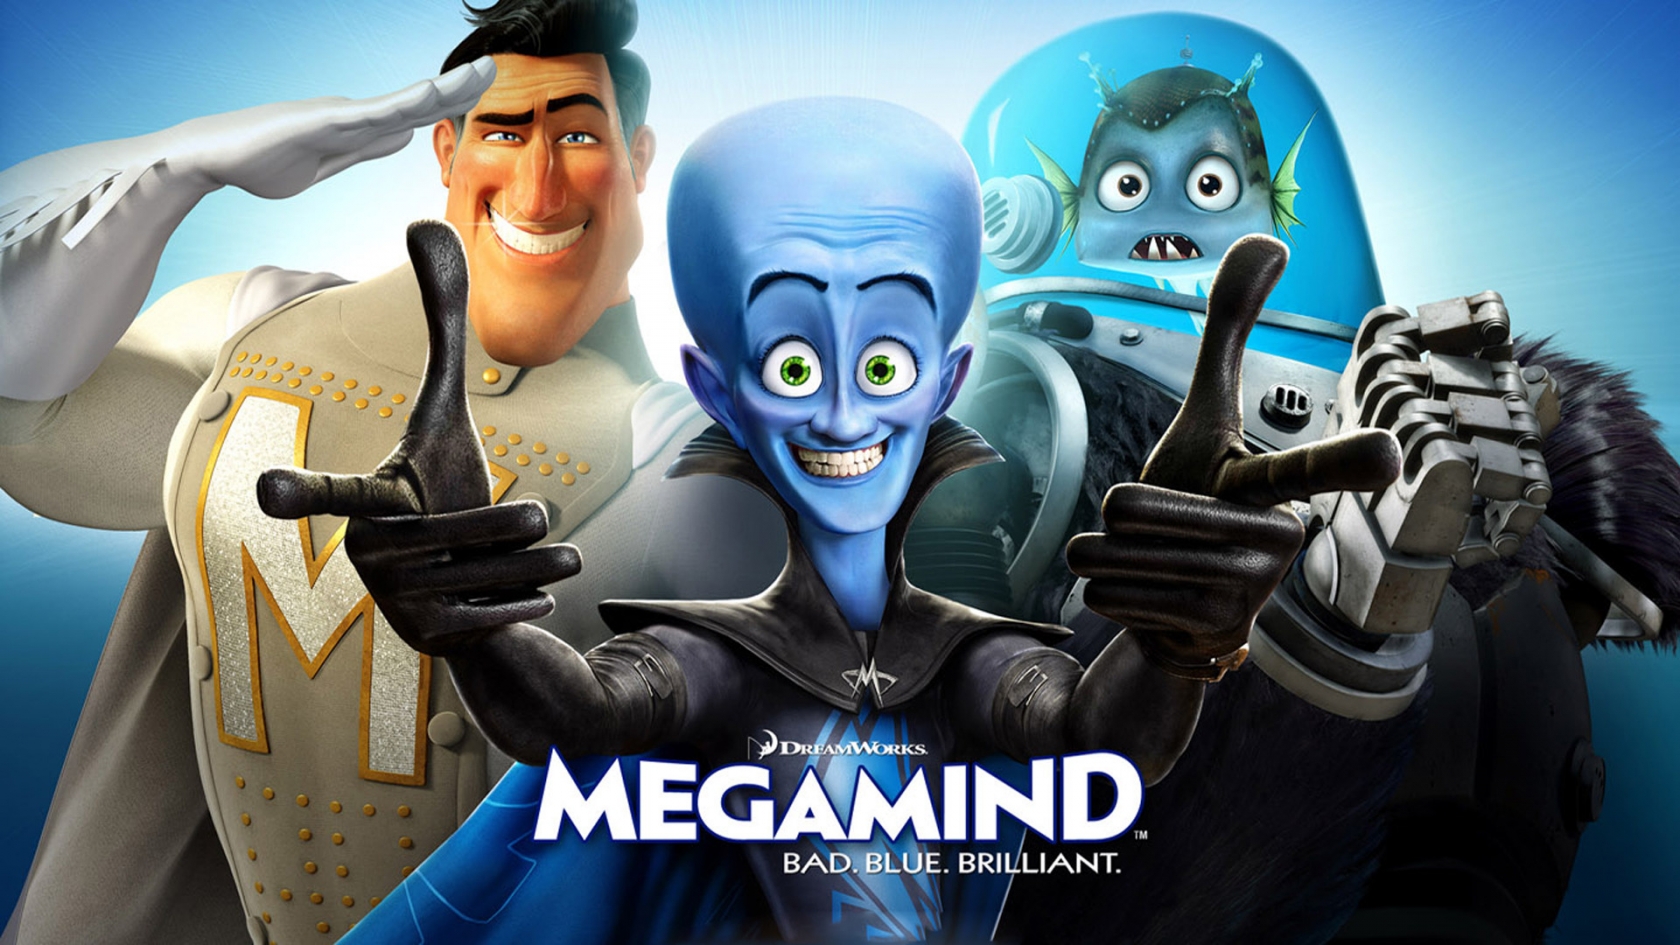 Megamind Characters for 1680 x 945 HDTV resolution